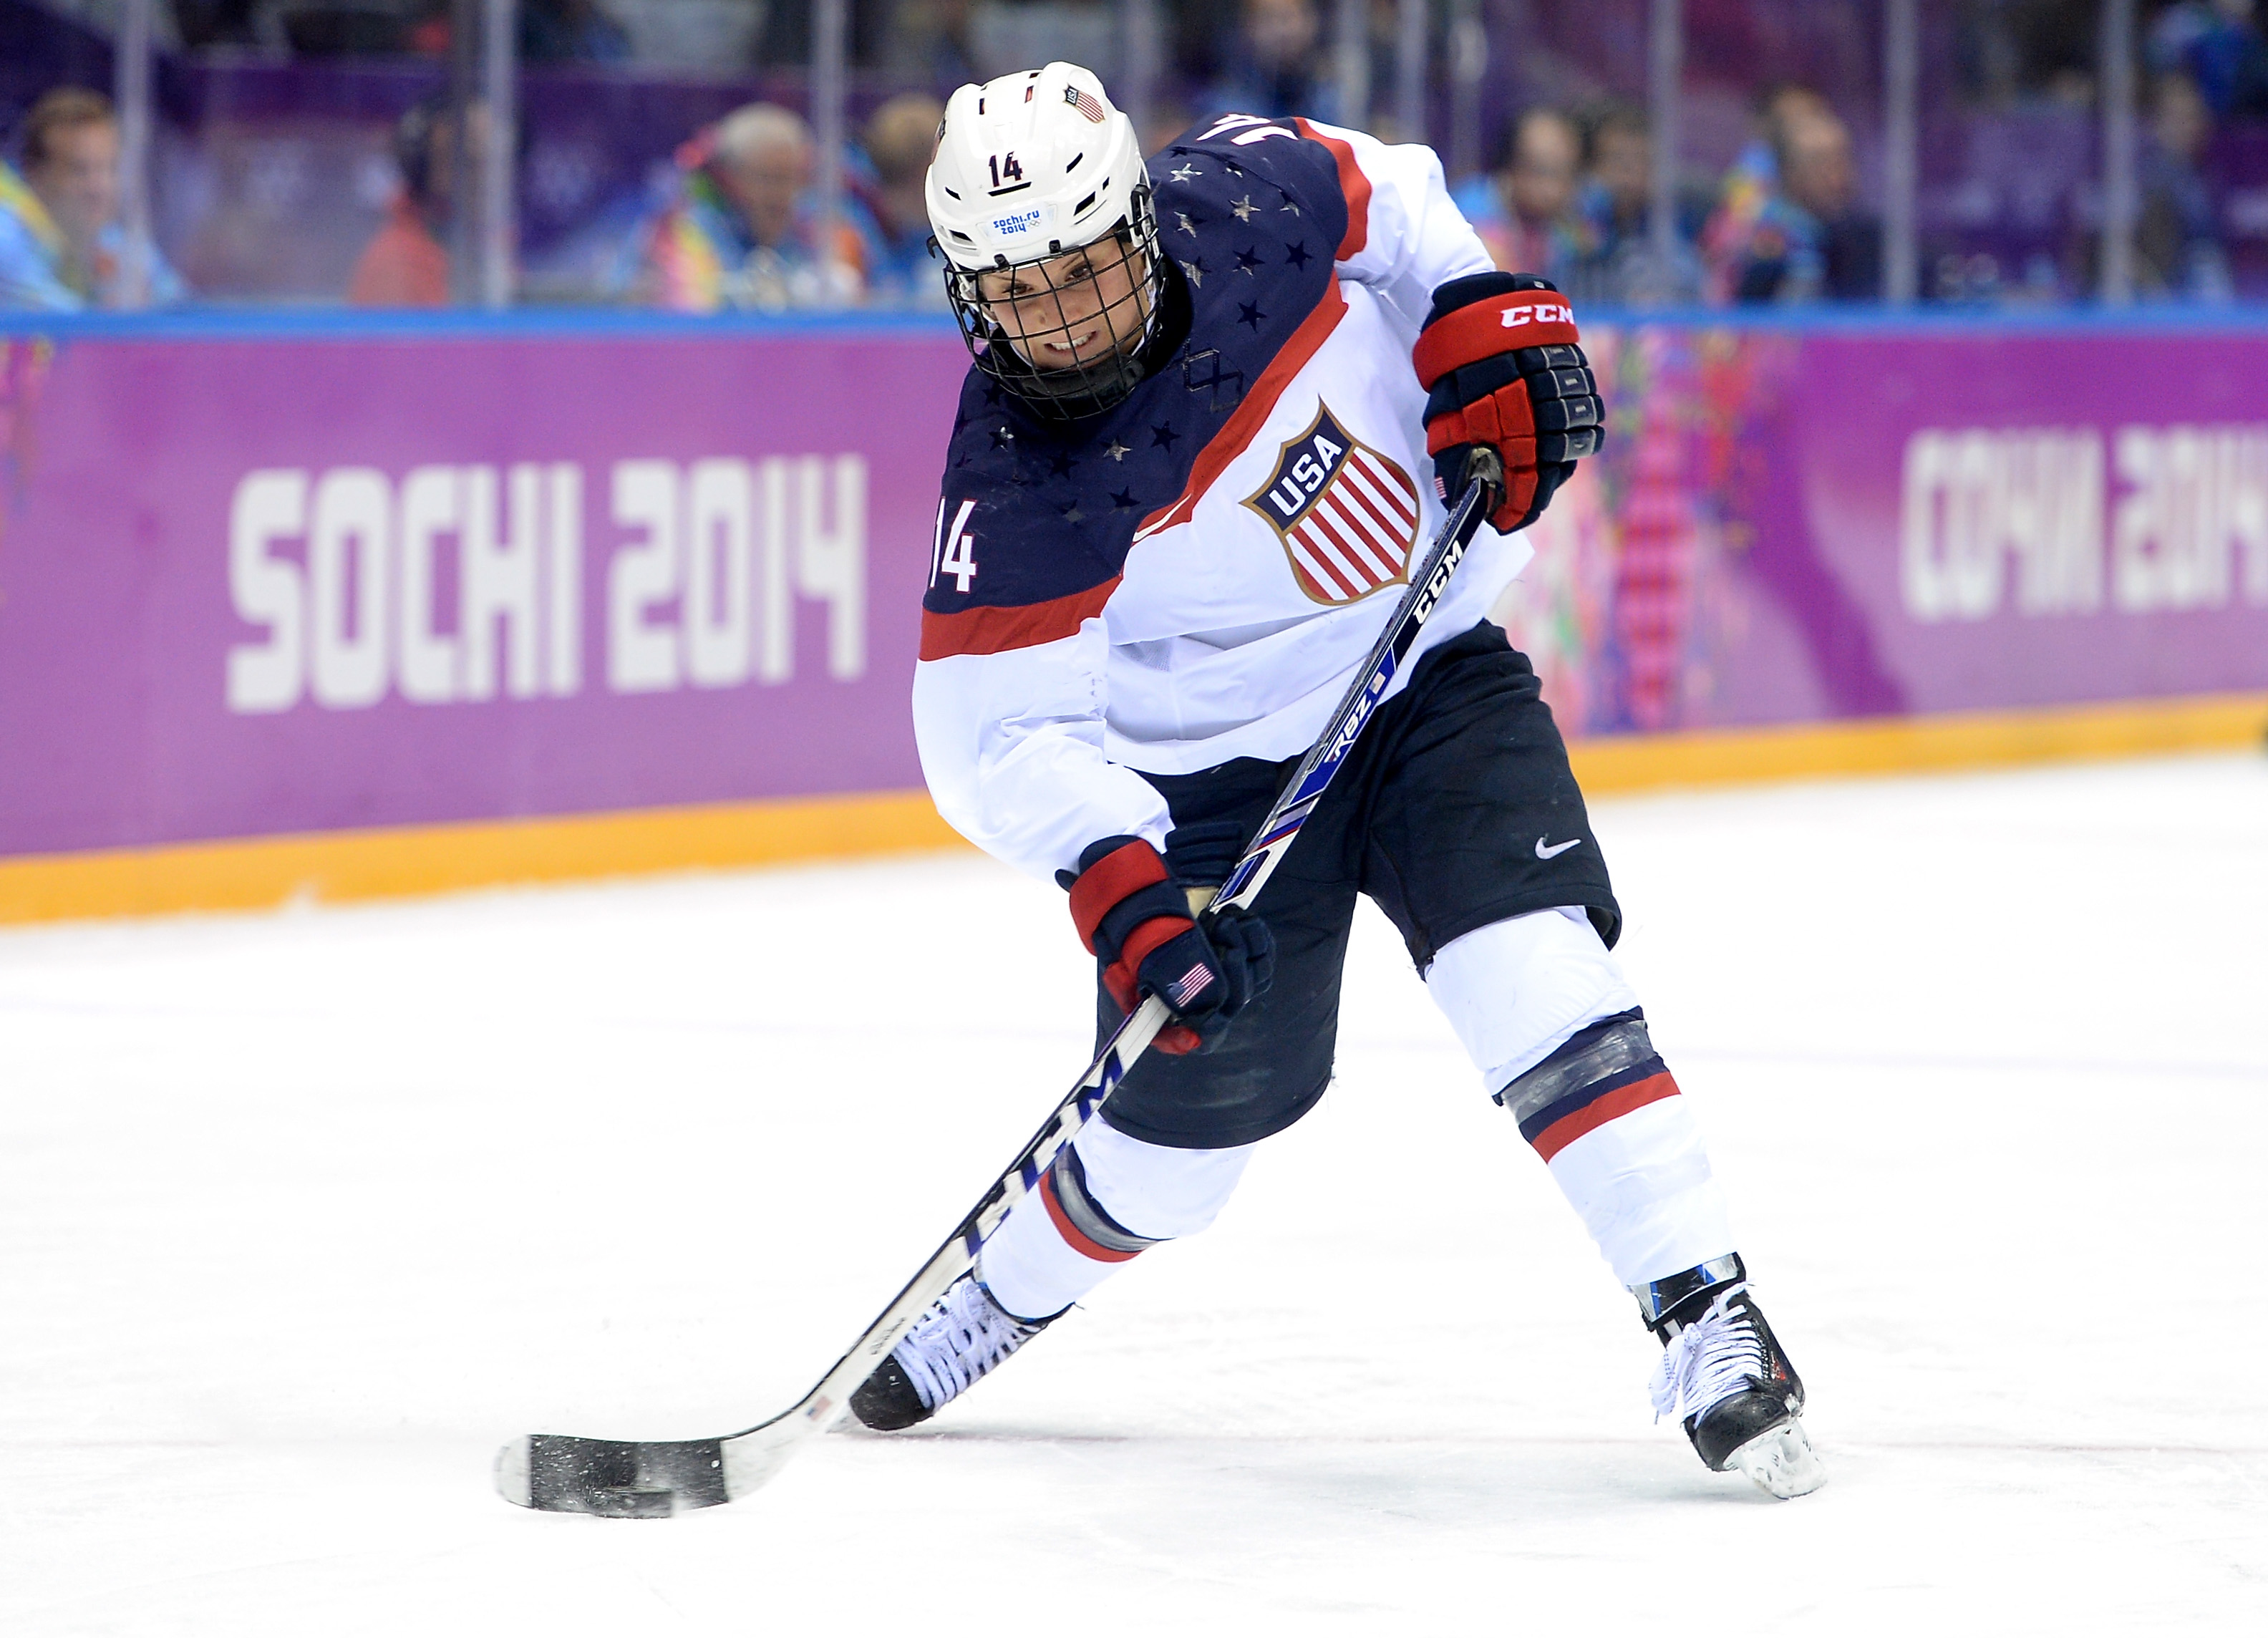 Brianna Decker #14 of the United States handles the puck against Canada during the Ice Hockey Women's Gold Medal Game on day 13 of the Sochi 2014 Winter Olympics at Bolshoy Ice Dome on February 20, 2014 in Sochi, Russia. (Photo by Harry How/Getty Images) (Harry How—Getty Images)